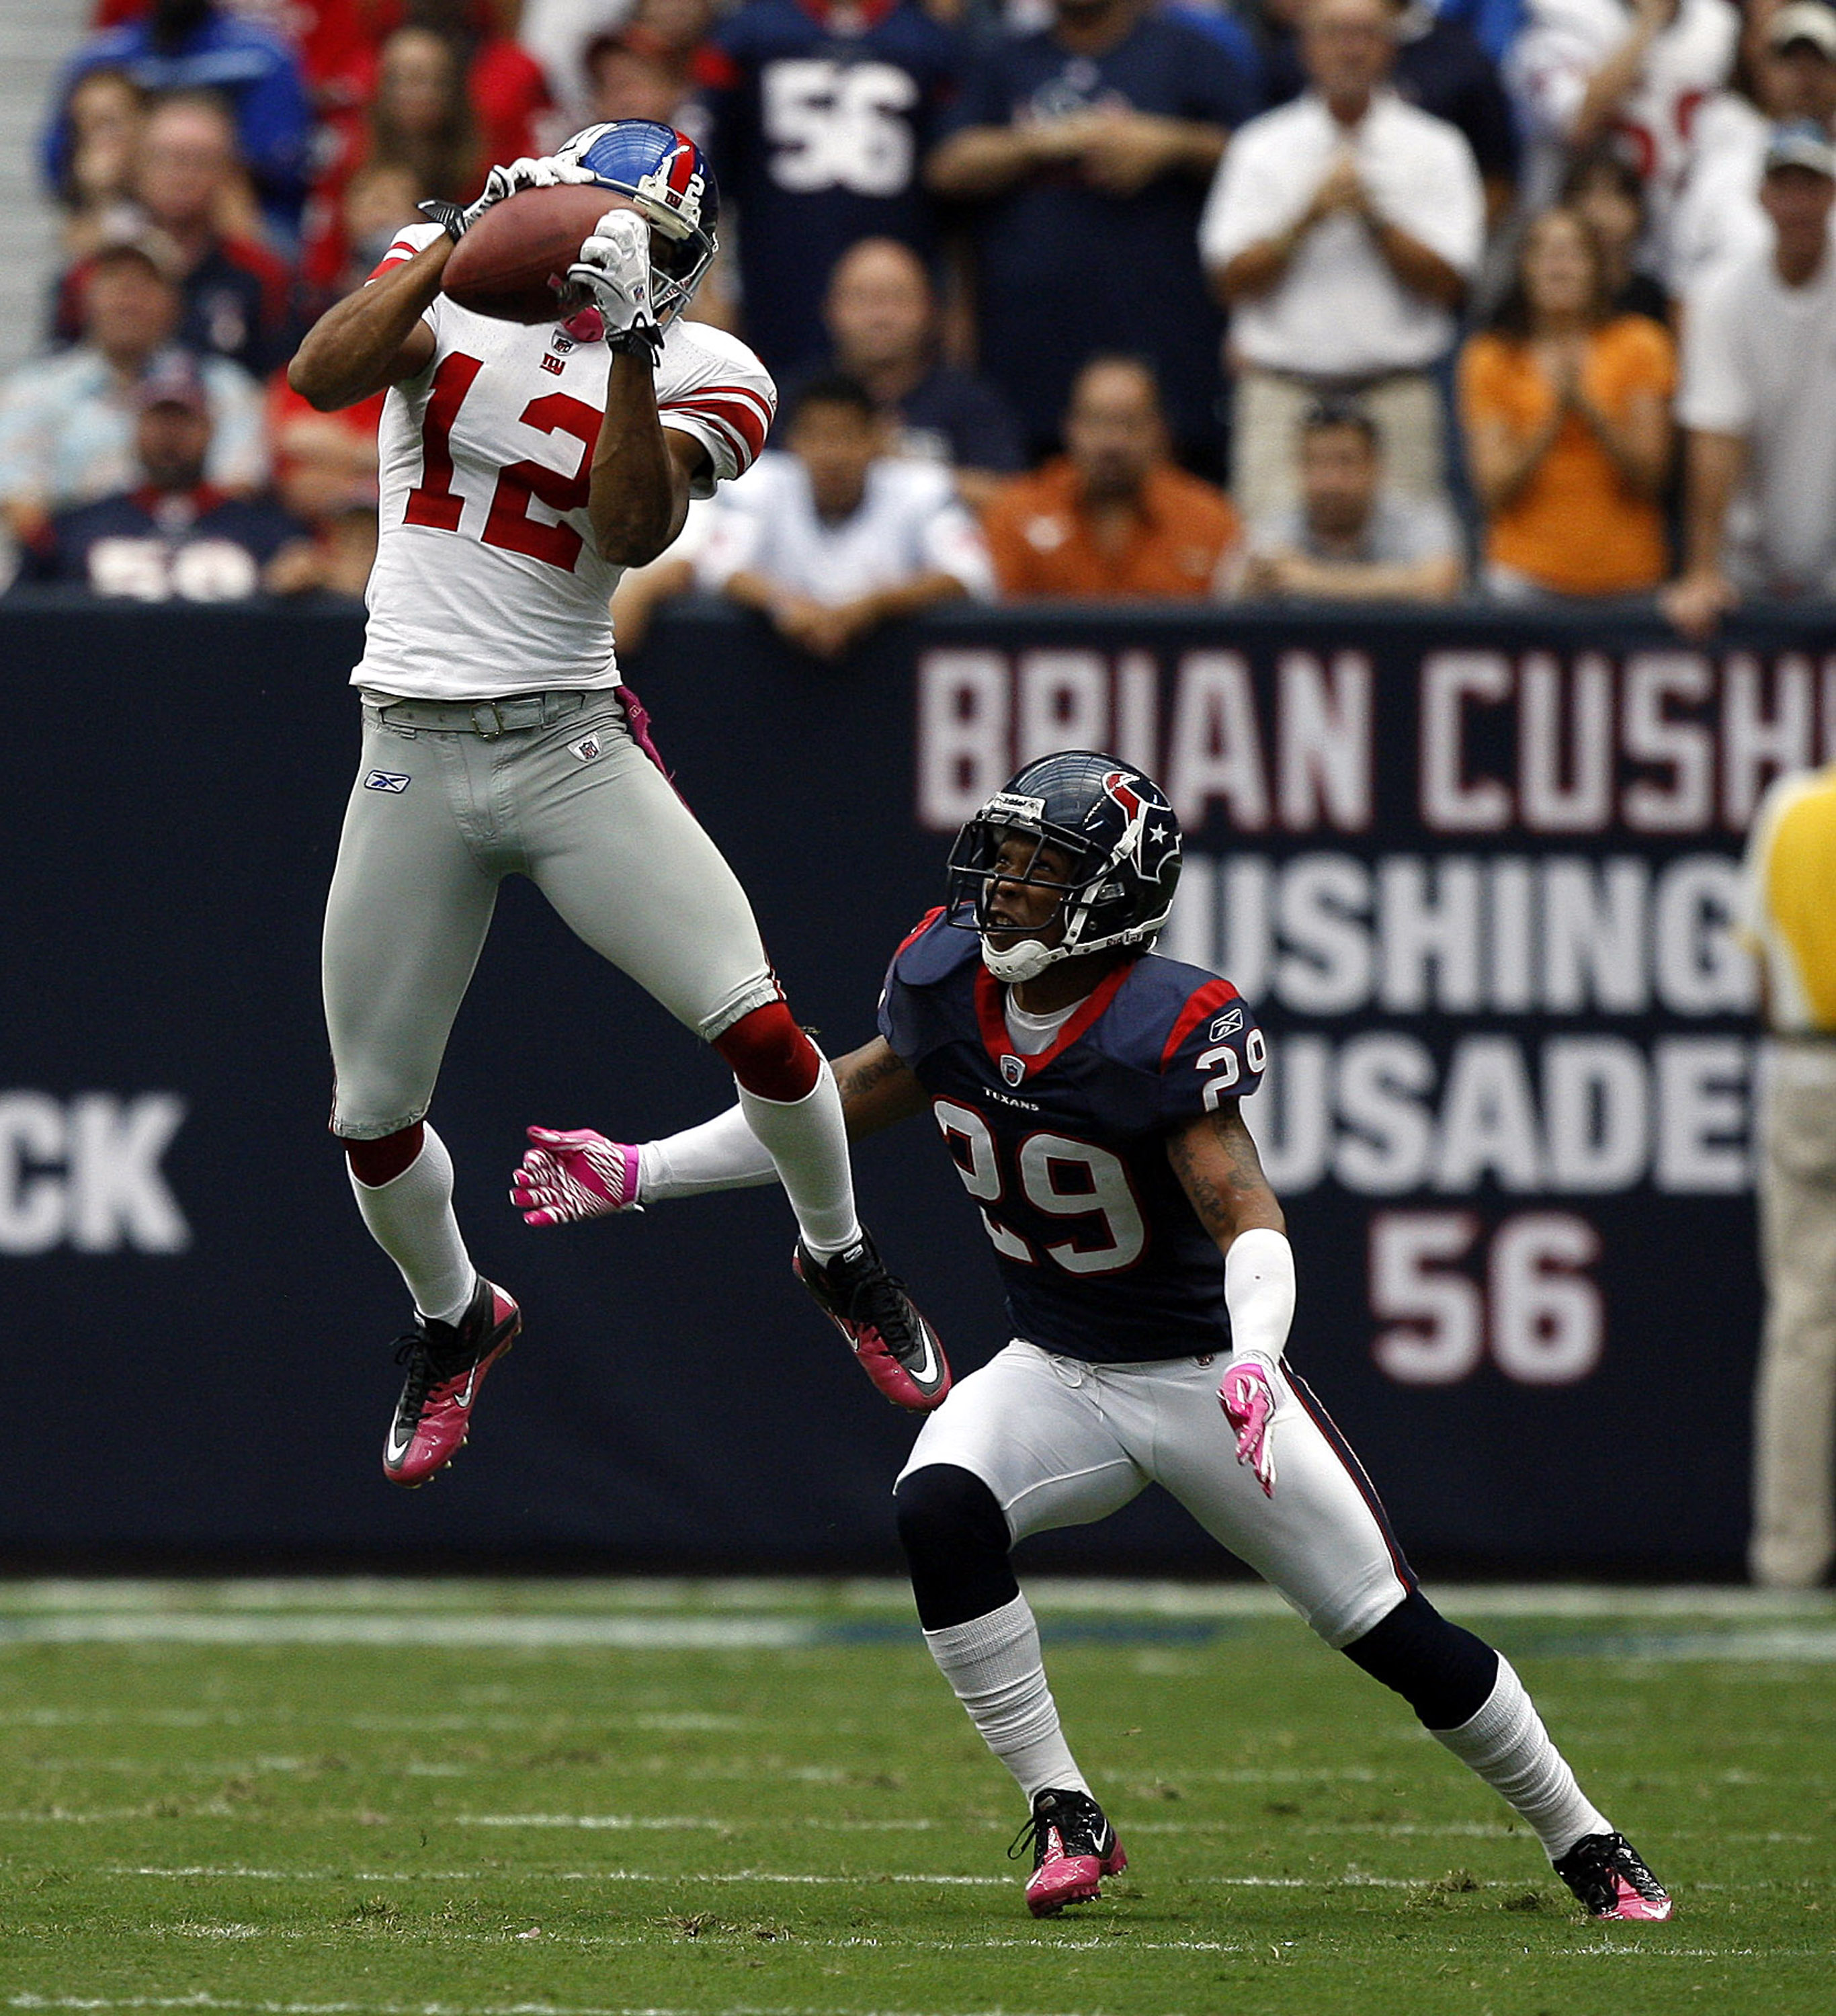 HOUSTON - OCTOBER 10:  Wide receiver Steve Smith #12 of the New York Giants goes up high in front of cornerback Glover Quin #29 of the Houston Texans in the first half at Reliant Stadium on October 10, 2010 in Houston, Texas.  (Photo by Bob Levey/Getty Im